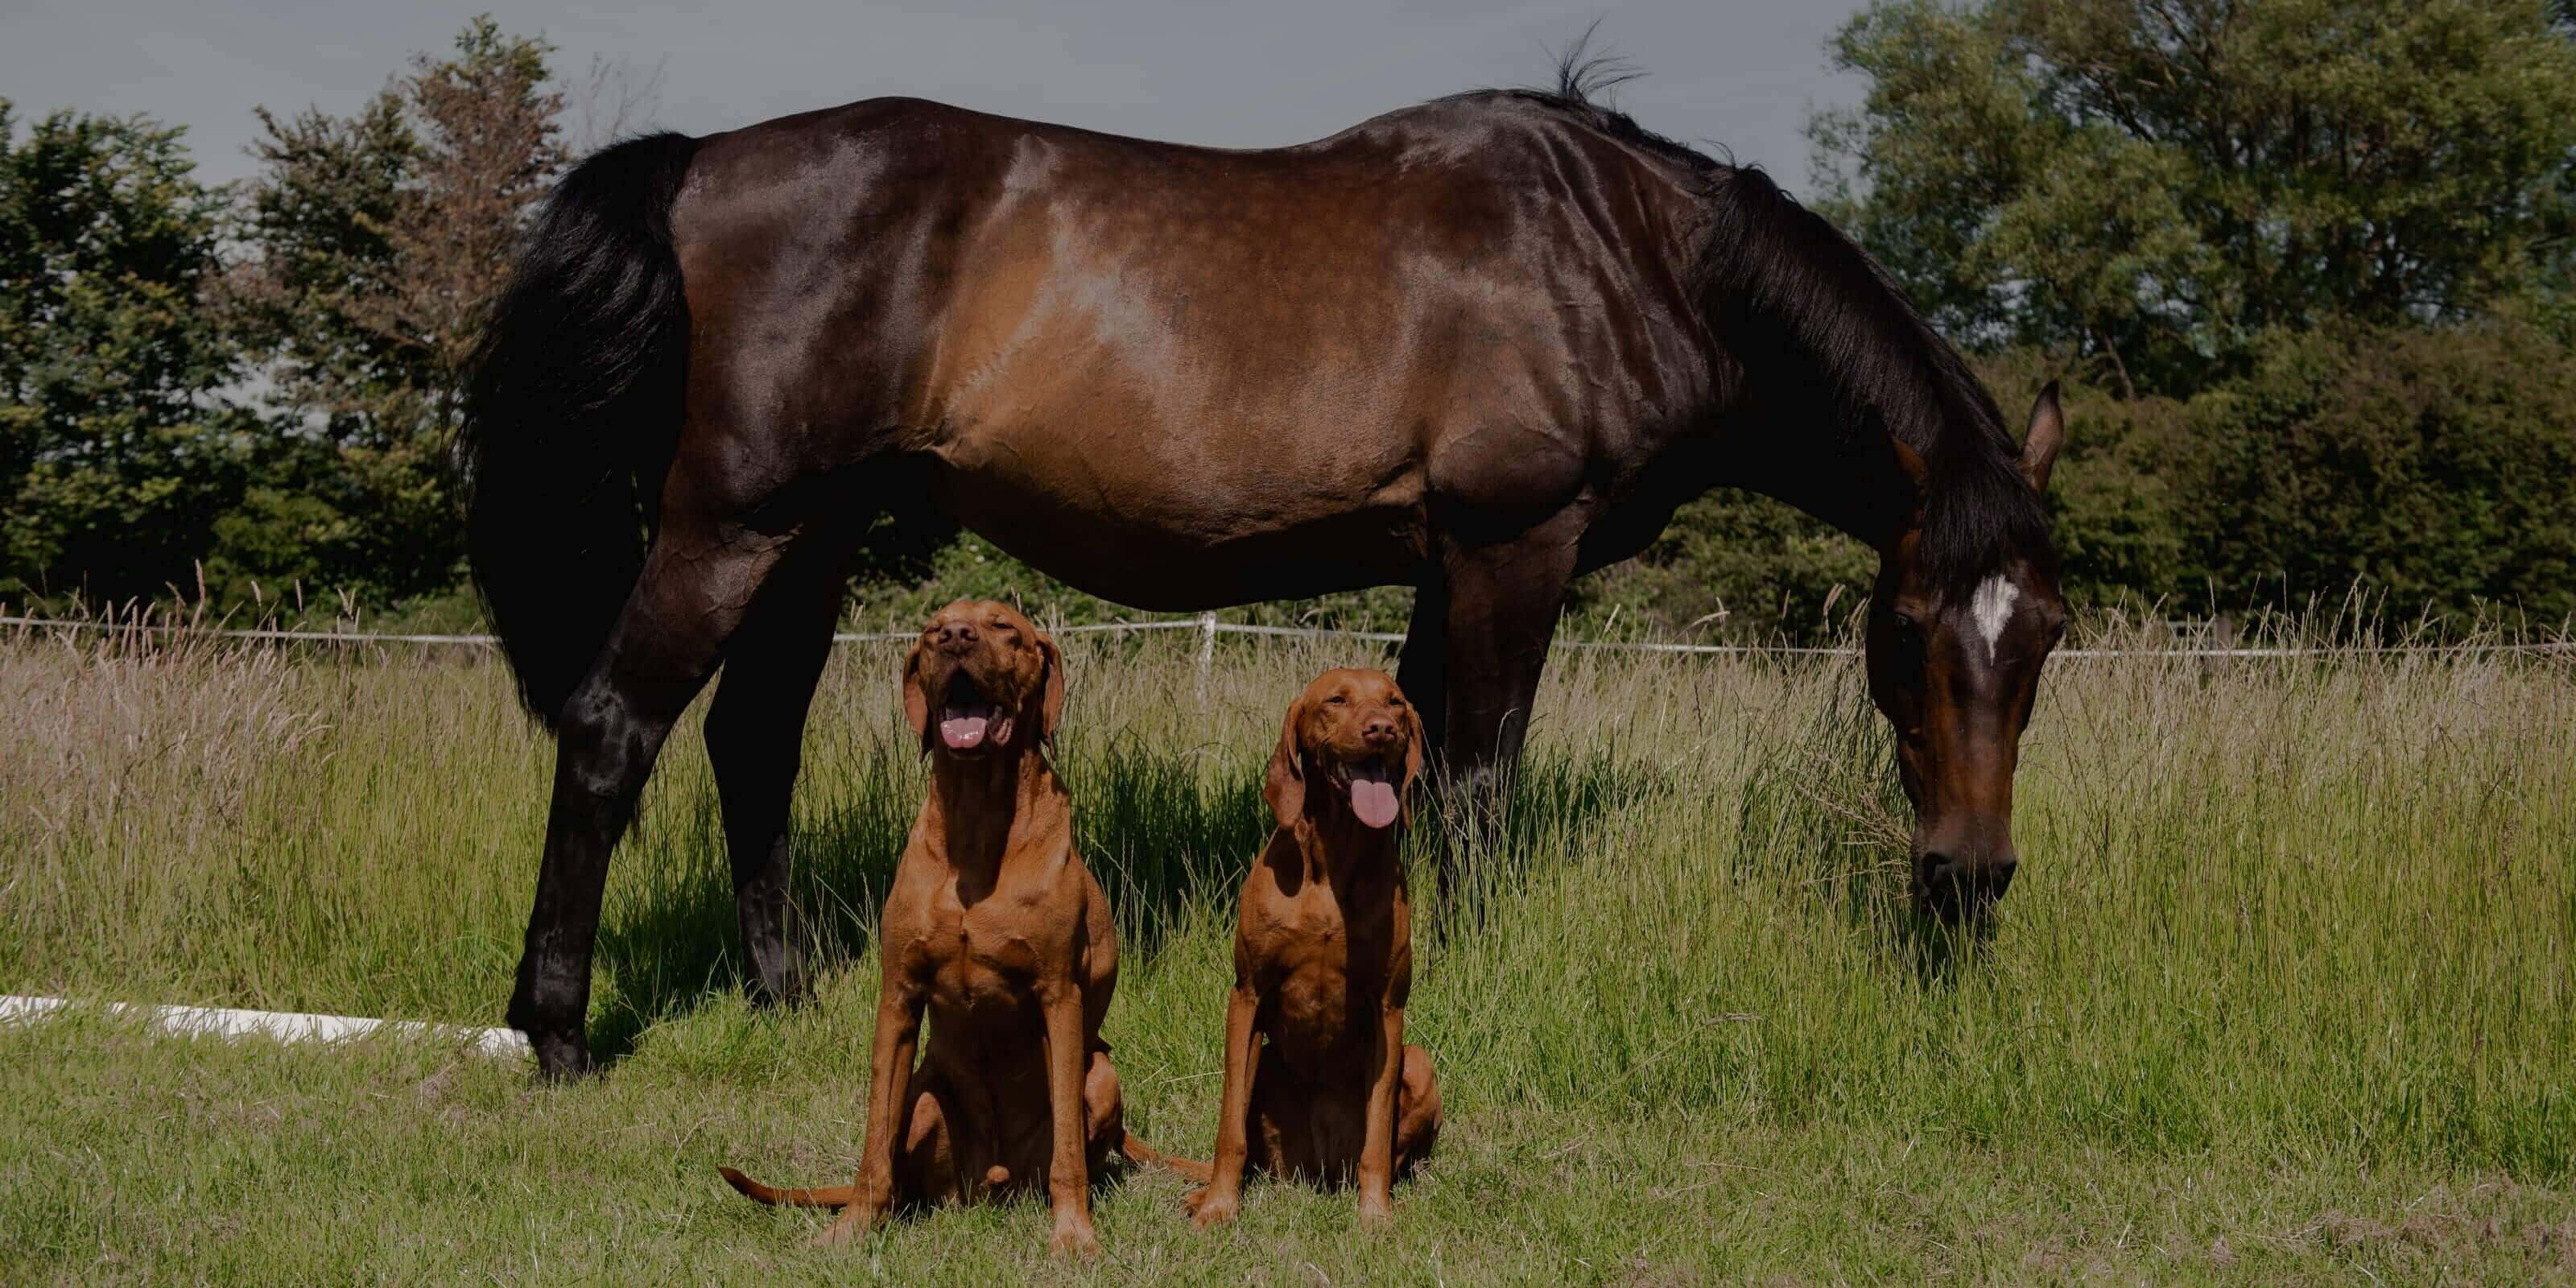 two brown dogs in front of a horse